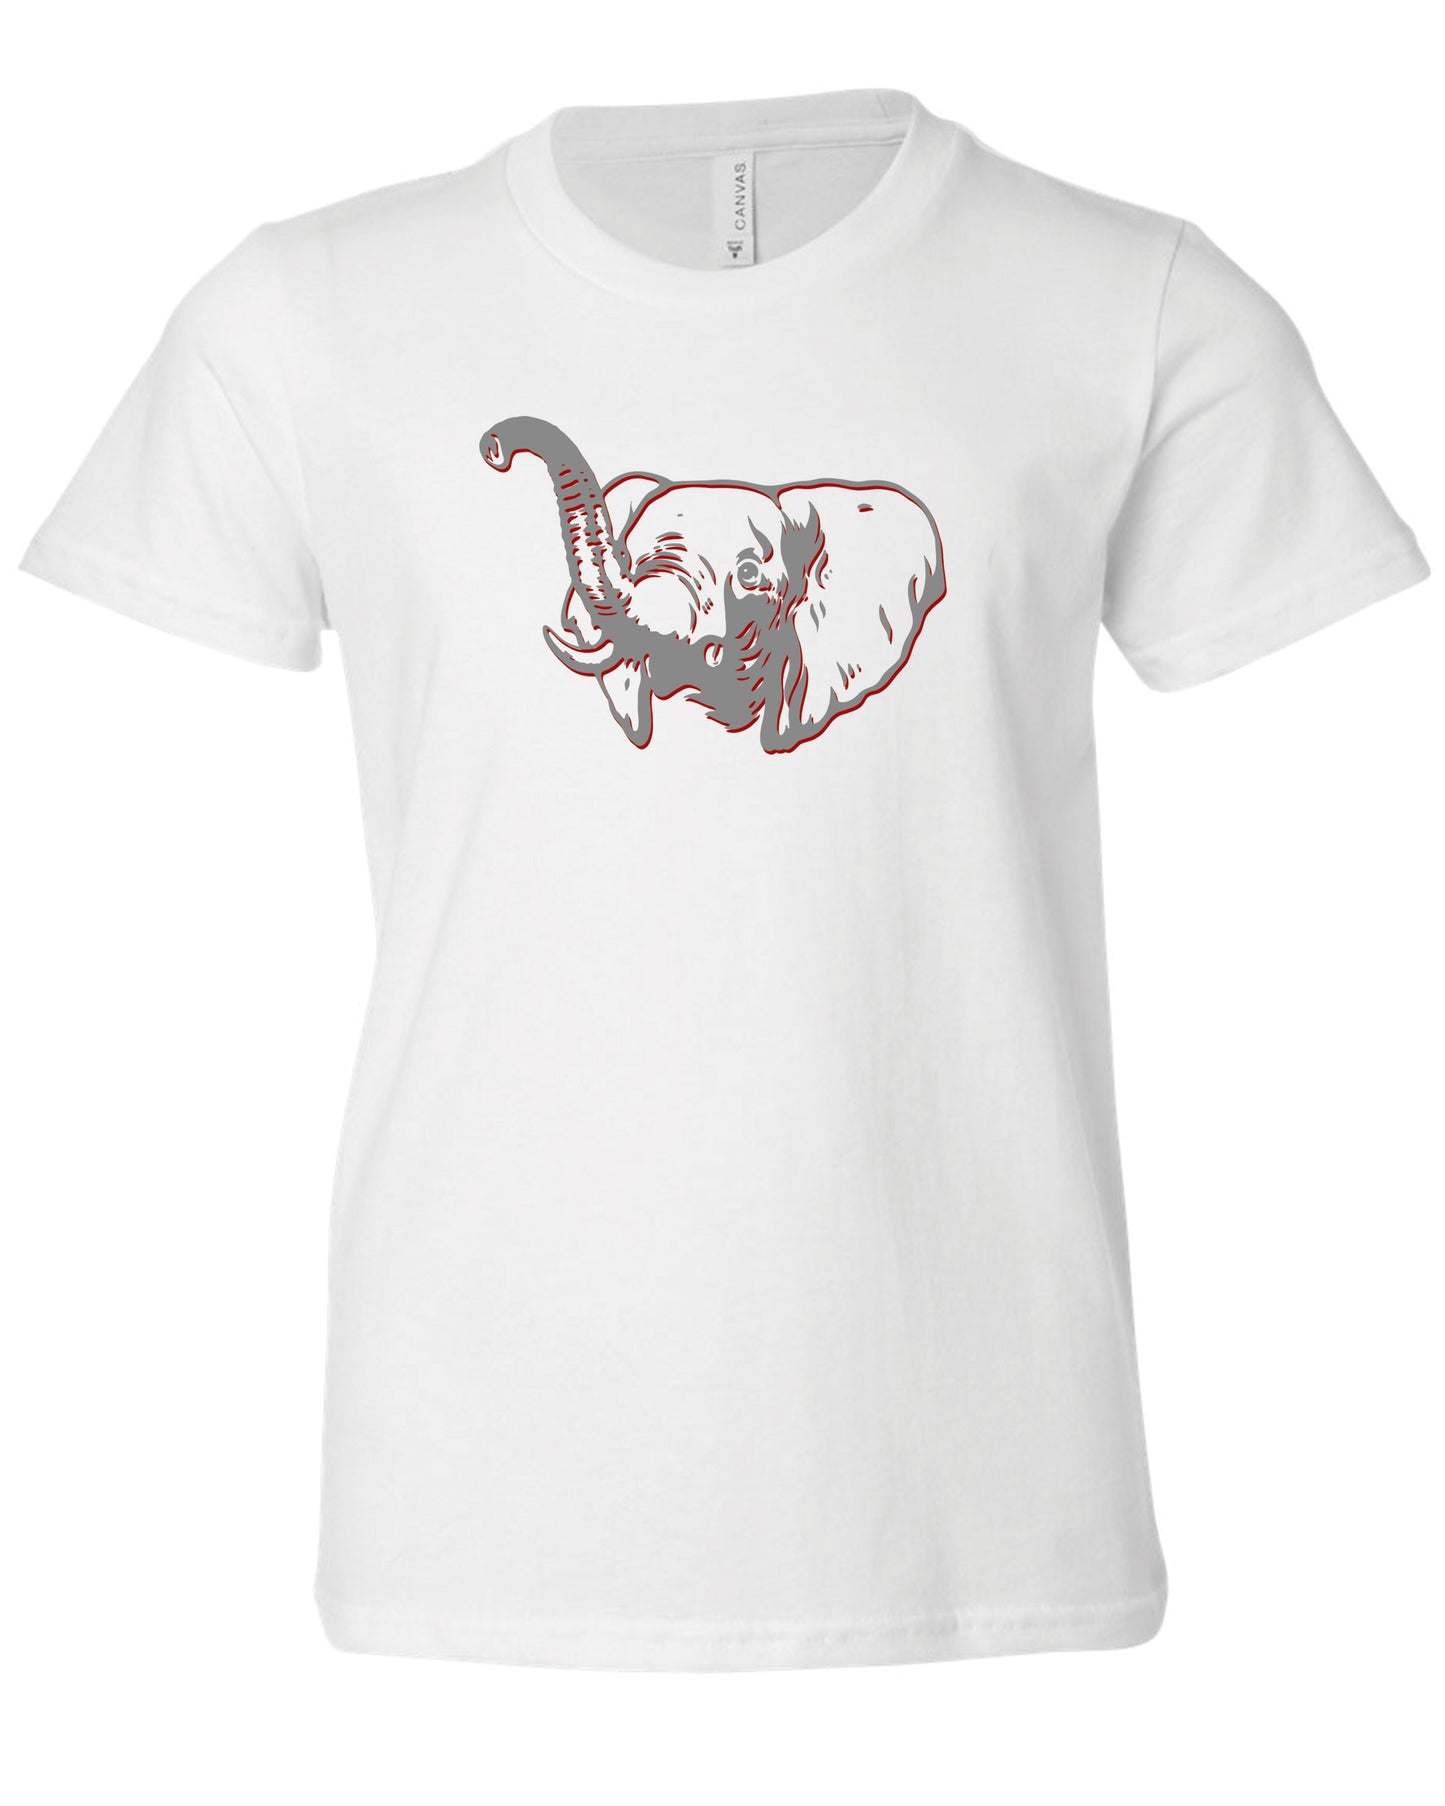 Sketch Elephant | Kids Tee-Kids Tees-Sister Shirts-Sister Shirts, Cute & Custom Tees for Mama & Littles in Trussville, Alabama.